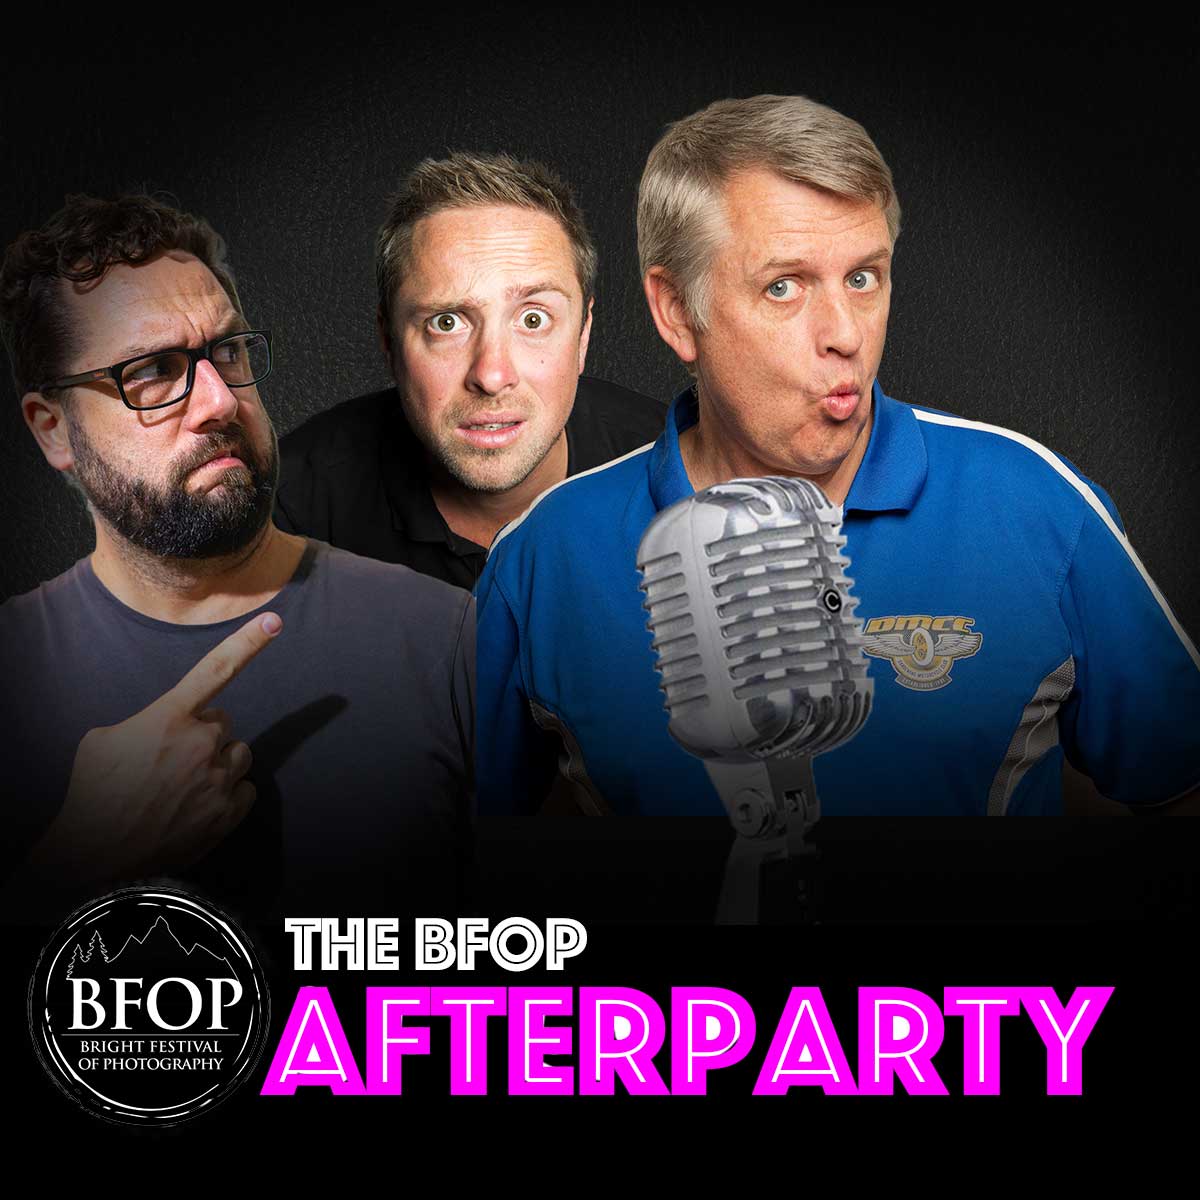 The BFOP Afterparty